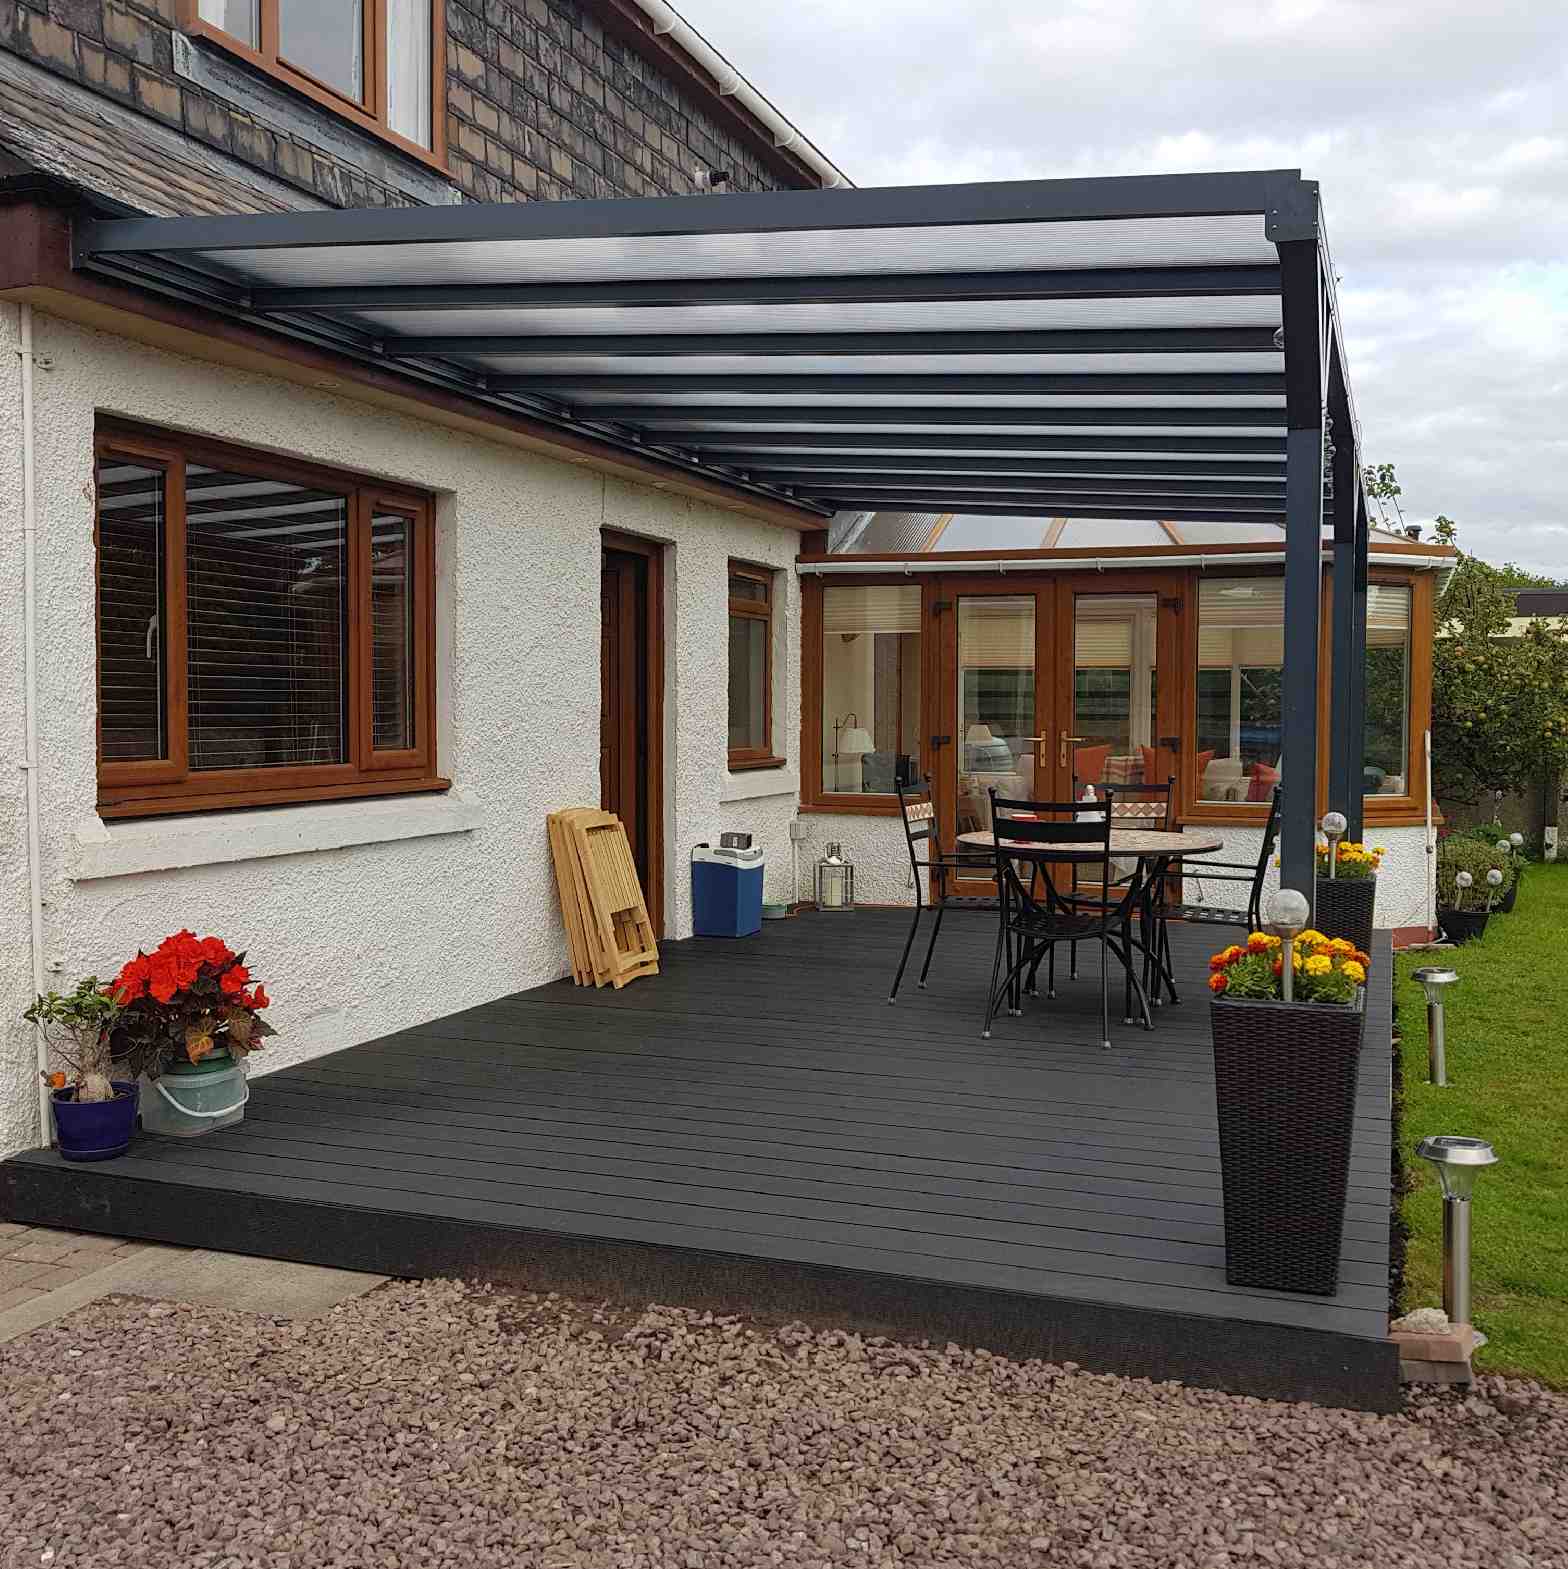 Buy Omega Verandah, Anthracite Grey, 6mm Glass Clear Plate Polycarbonate Glazing - 10.5m (W) x 3.5m (P), (5) Supporting Posts online today